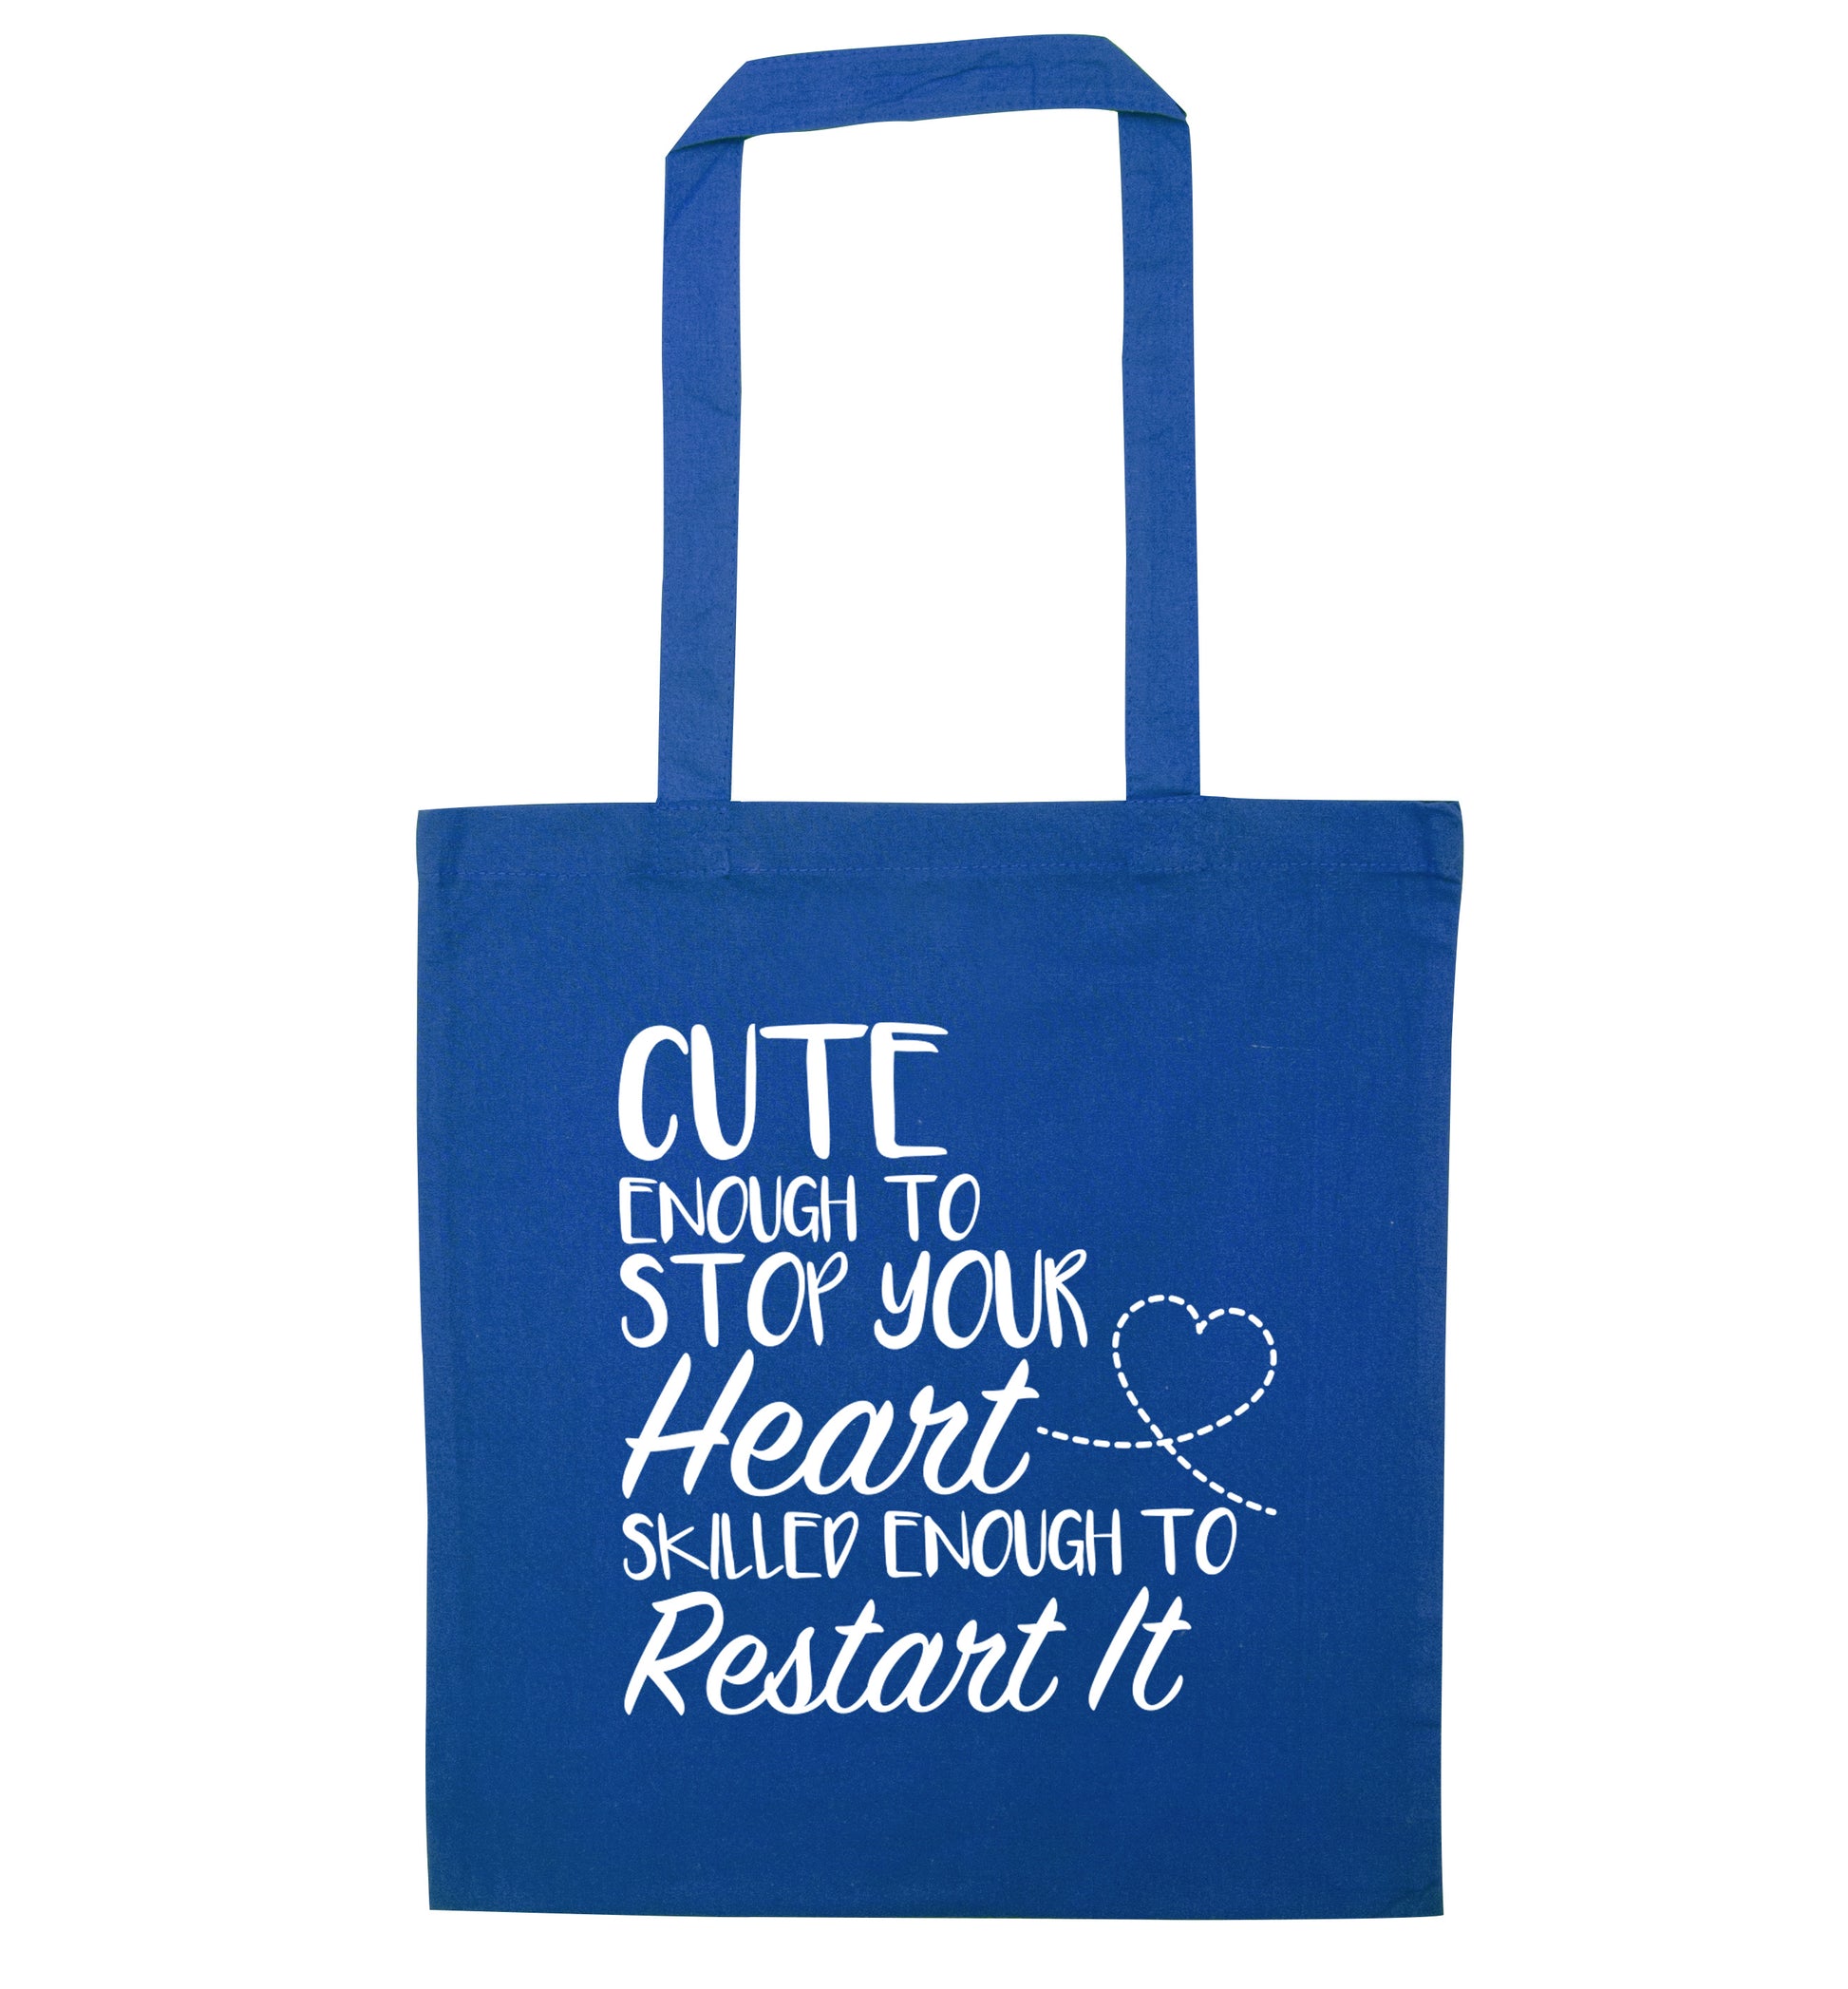 Cute enough to stop your heart skilled enough to restart it blue tote bag